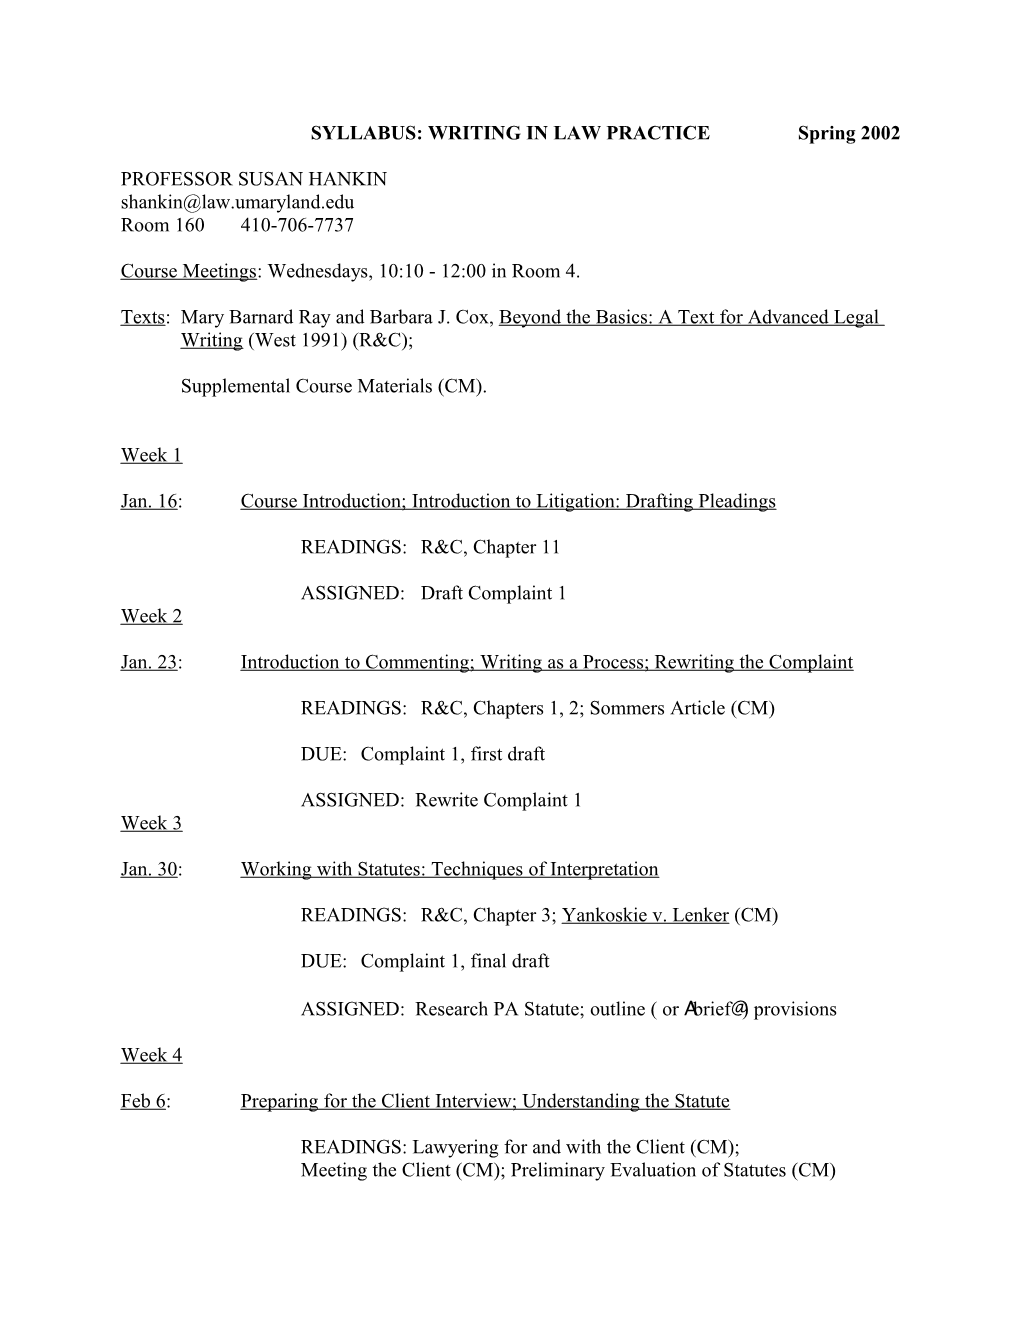 SYLLABUS: WRITING in LAW Practicespring 2002